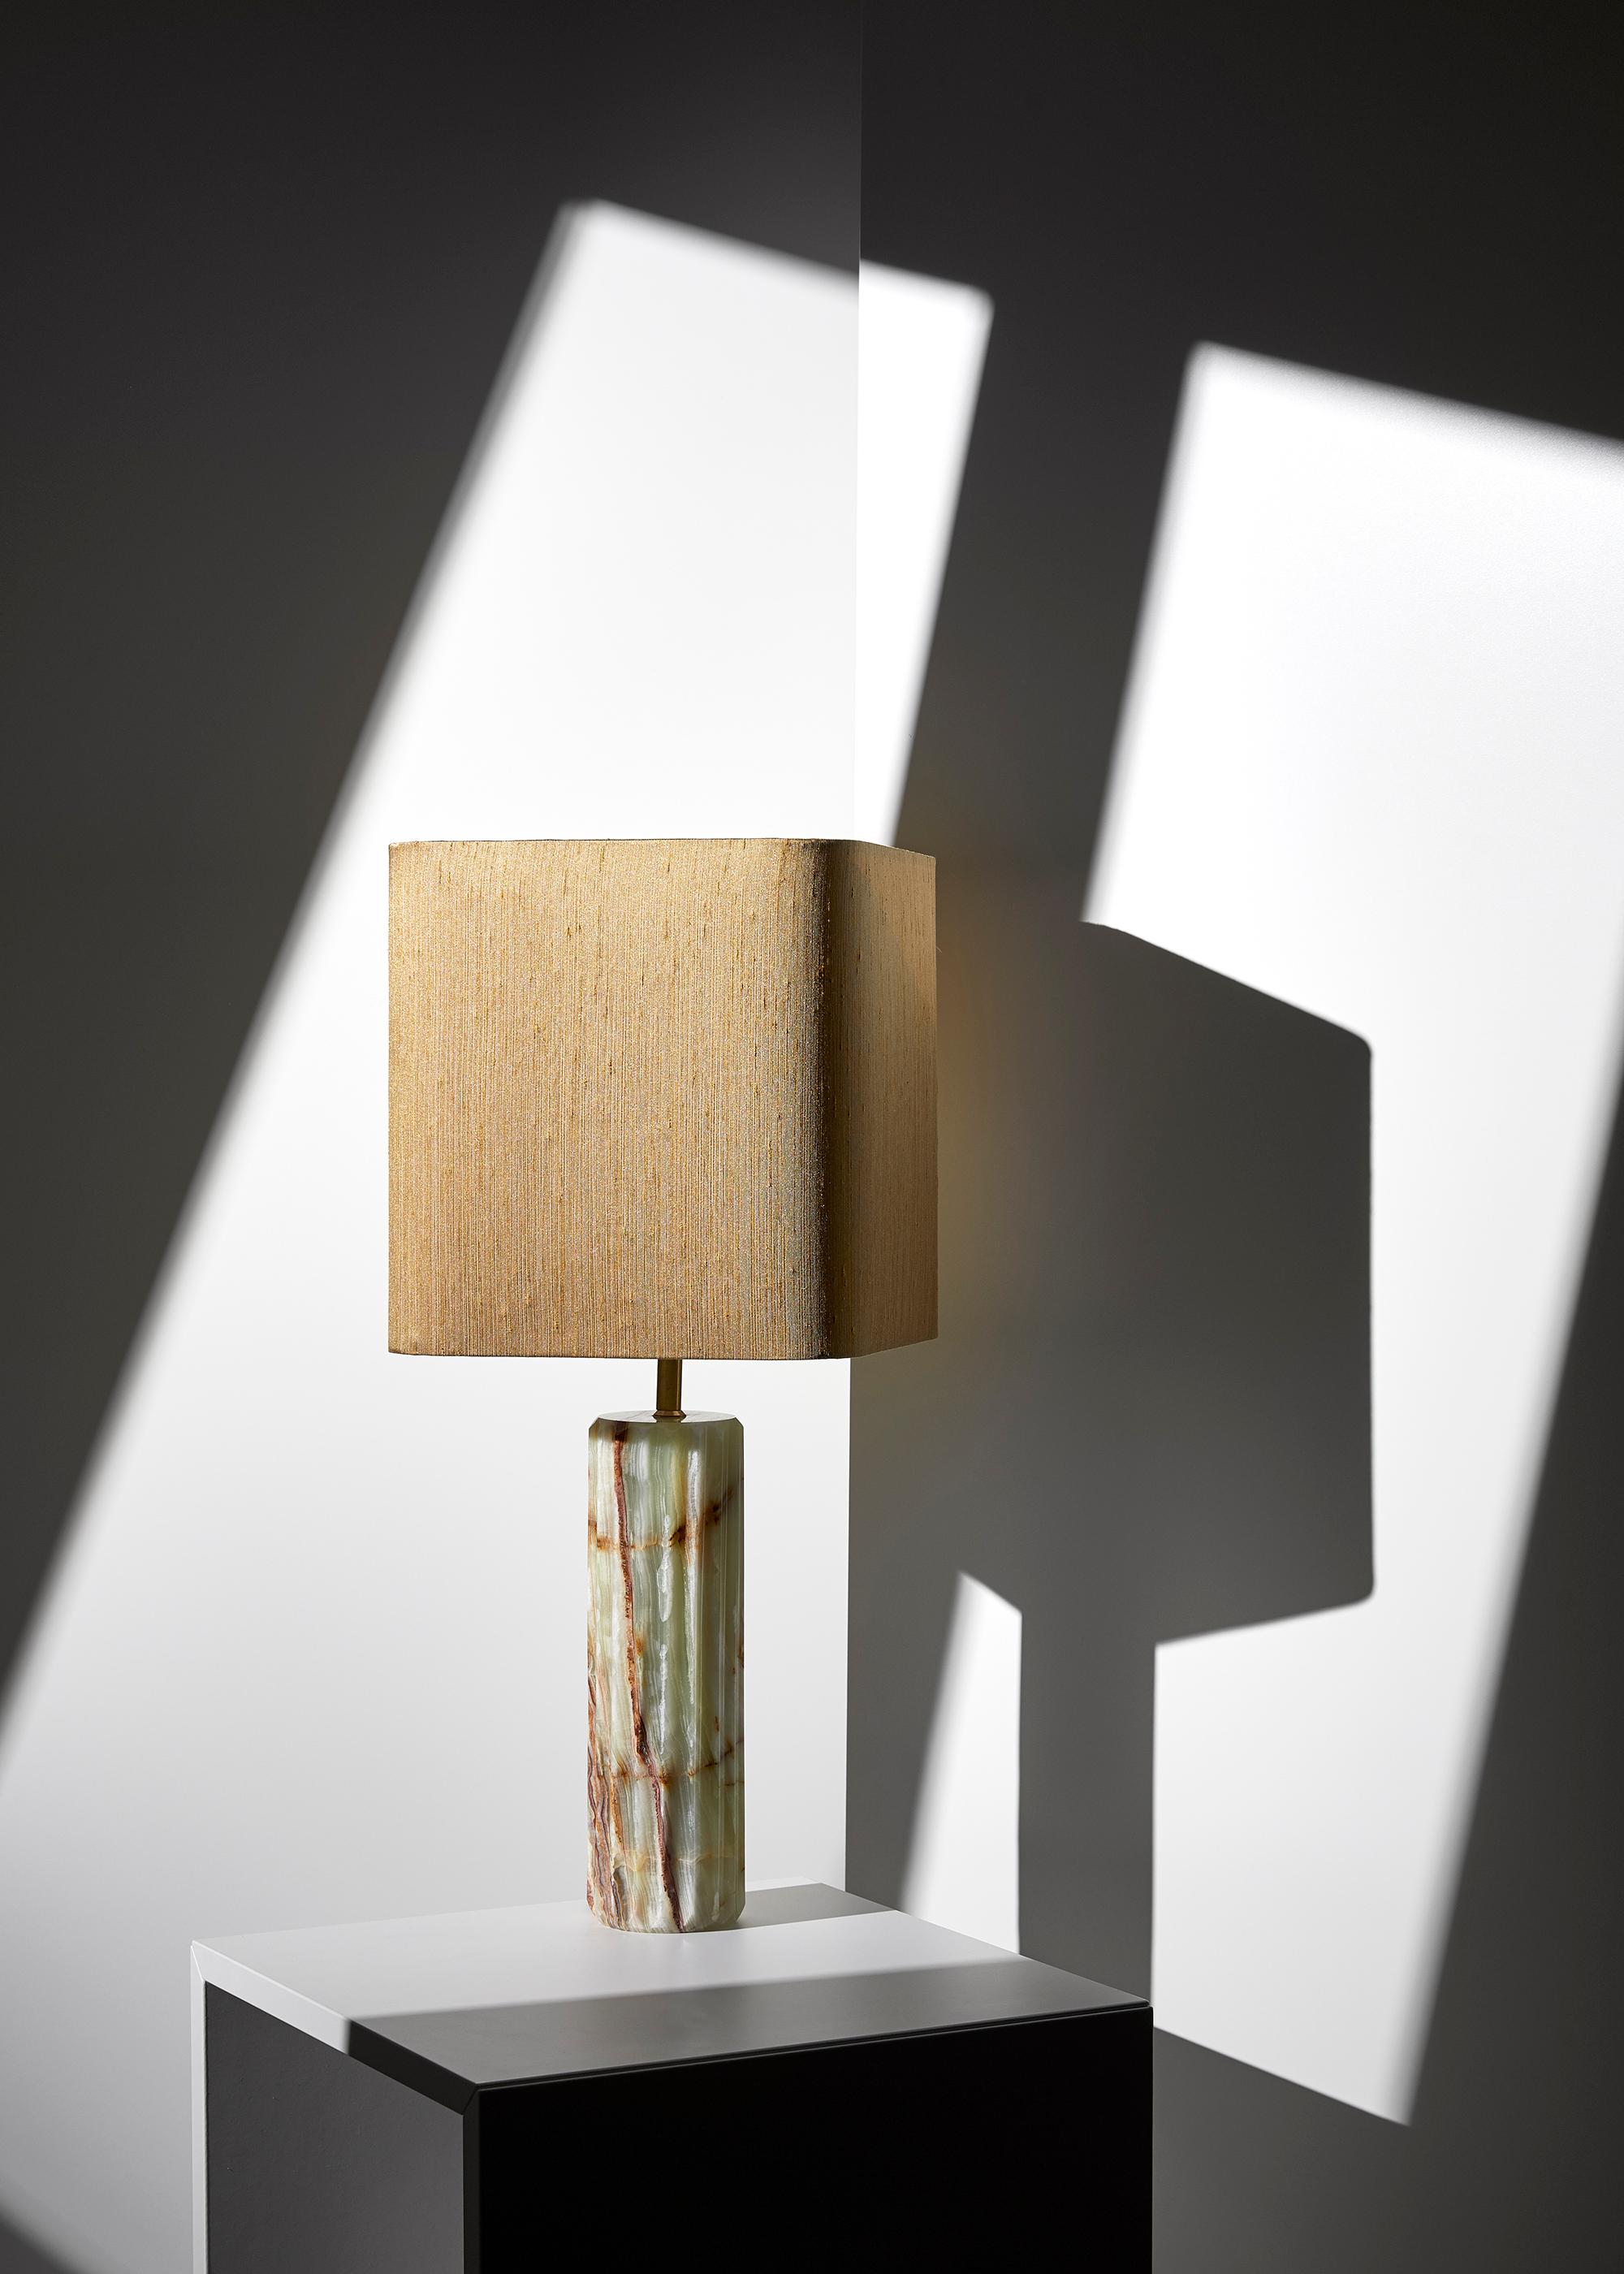 Set of 2 Onyx proud table lamp by Lisette Rützou
Dimensions: 25 x H 55 cm
Materials: Onyx

All our lamps can be wired according to each country. If sold to the USA it will be wired for the USA for instance.

 Lisette Rützou’s design is